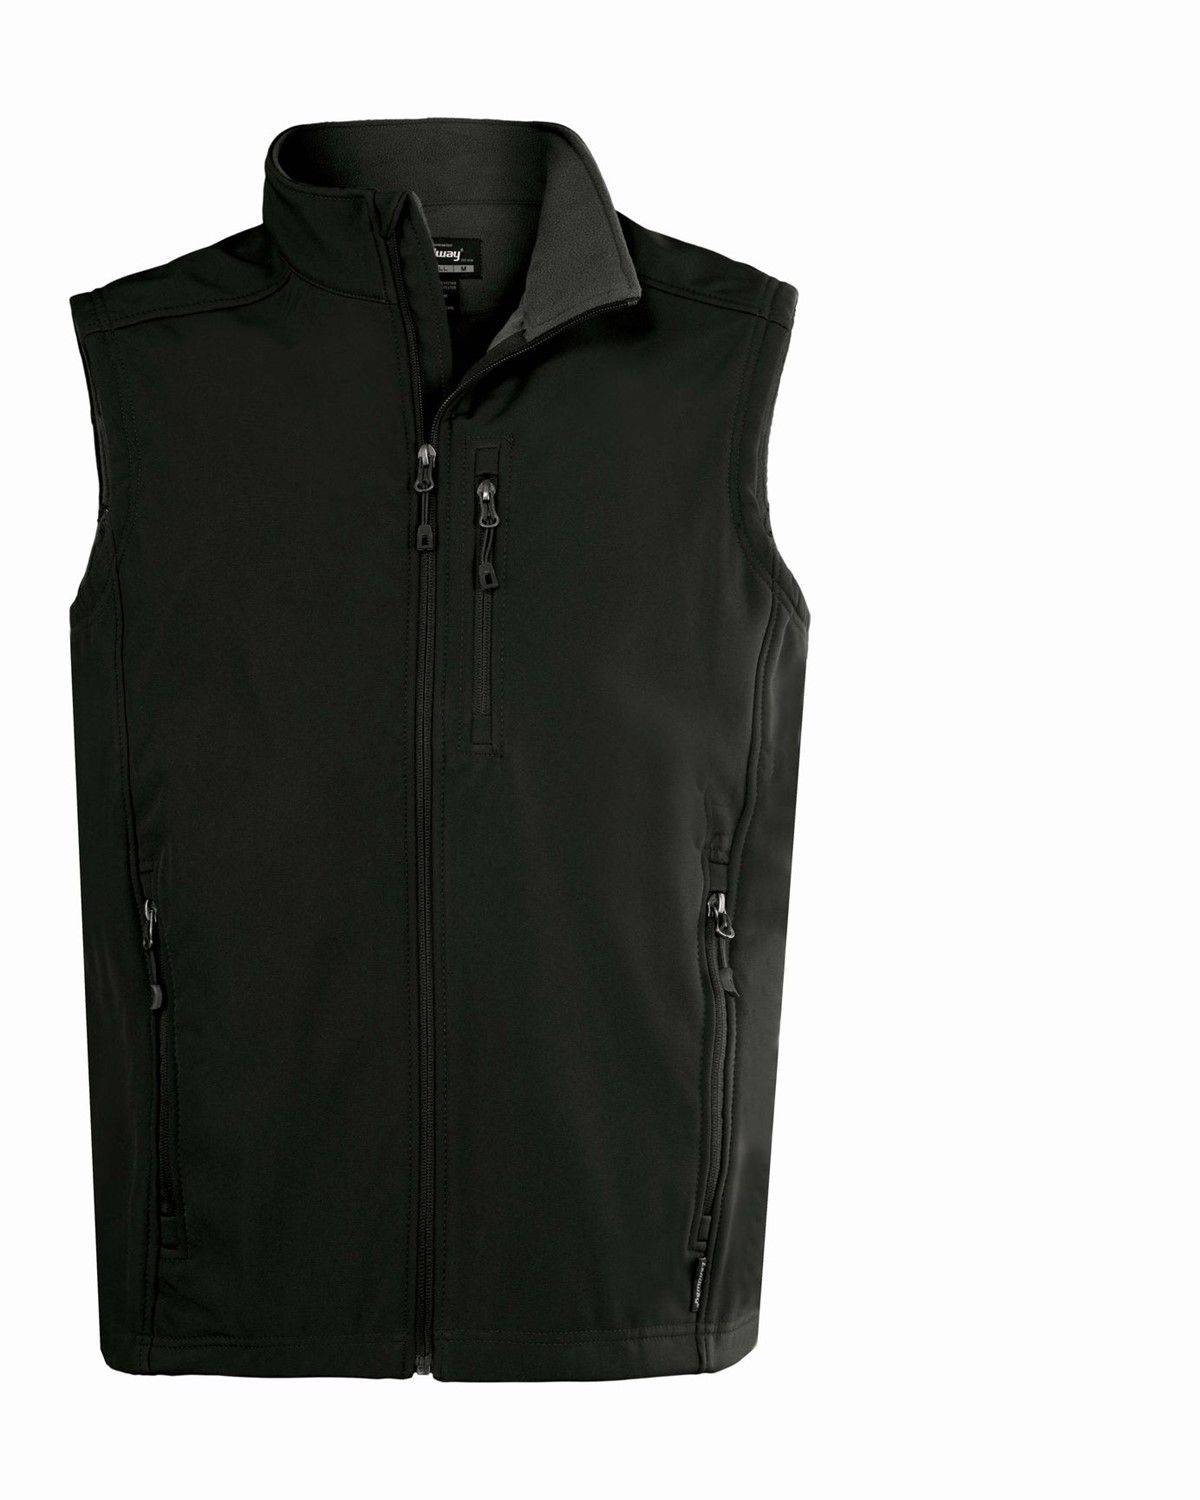 Tundra Landway Mens Water Resistant Bonded Soft Shell Vest Large